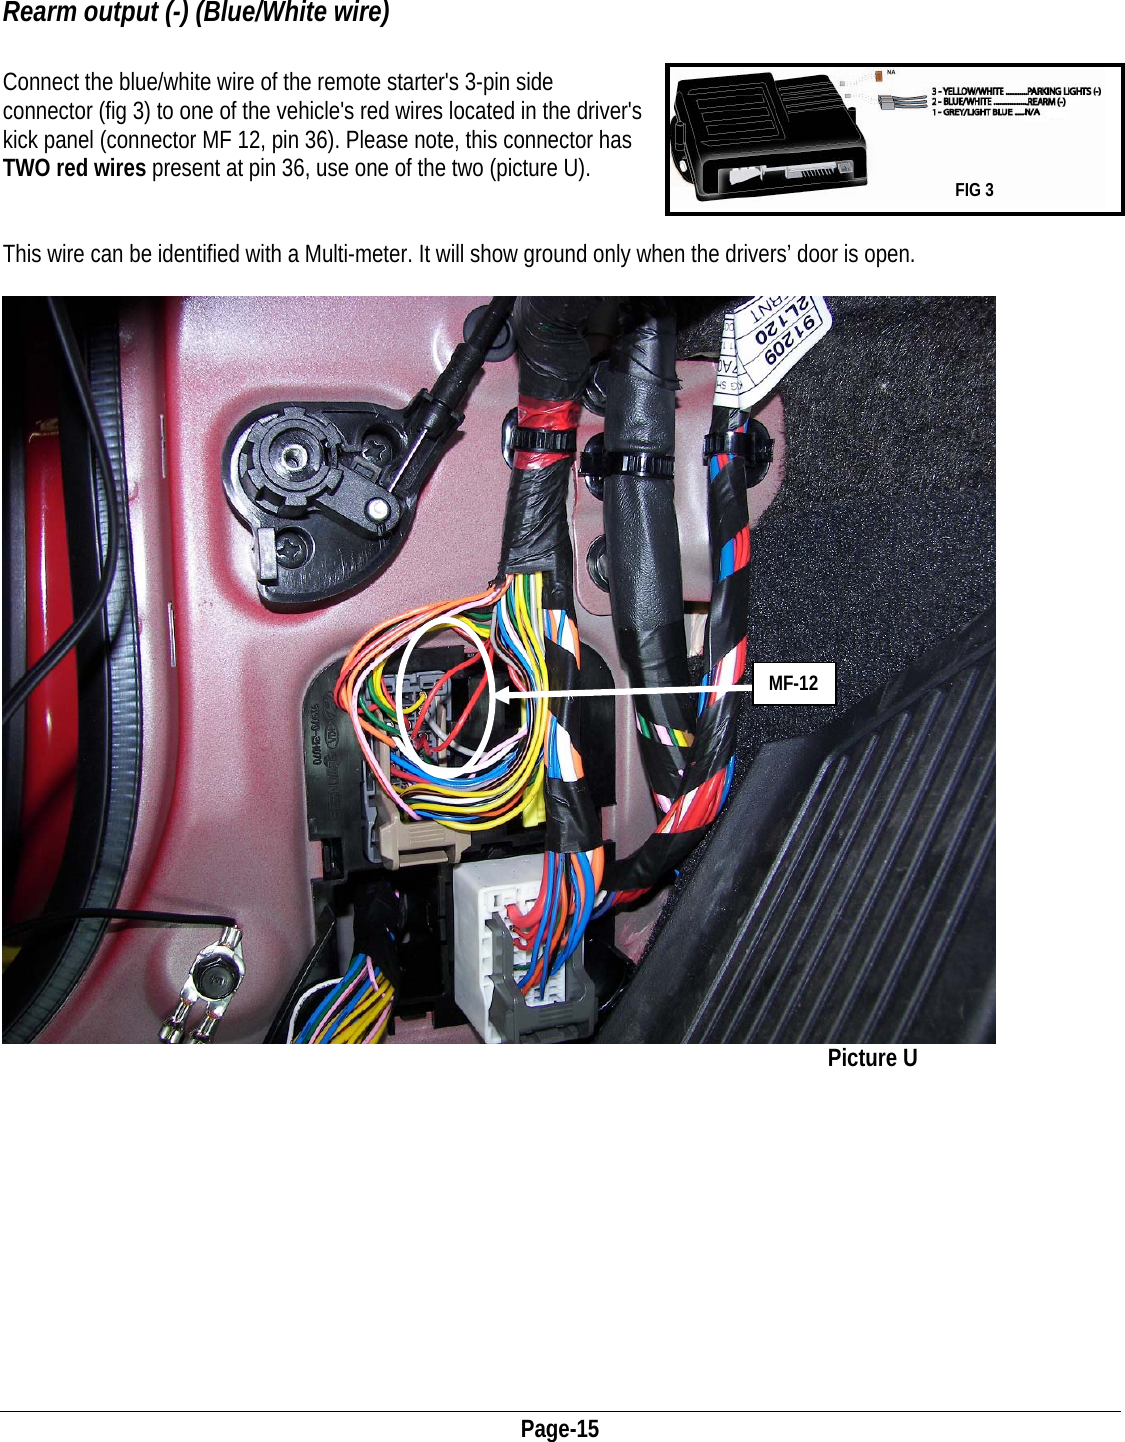  Page-15   Rearm output (-) (Blue/White wire)  Connect the blue/white wire of the remote starter&apos;s 3-pin side connector (fig 3) to one of the vehicle&apos;s red wires located in the driver&apos;s kick panel (connector MF 12, pin 36). Please note, this connector has TWO red wires present at pin 36, use one of the two (picture U).   FIG 3   This wire can be identified with a Multi-meter. It will show ground only when the drivers’ door is open.   MF-12            Picture U            